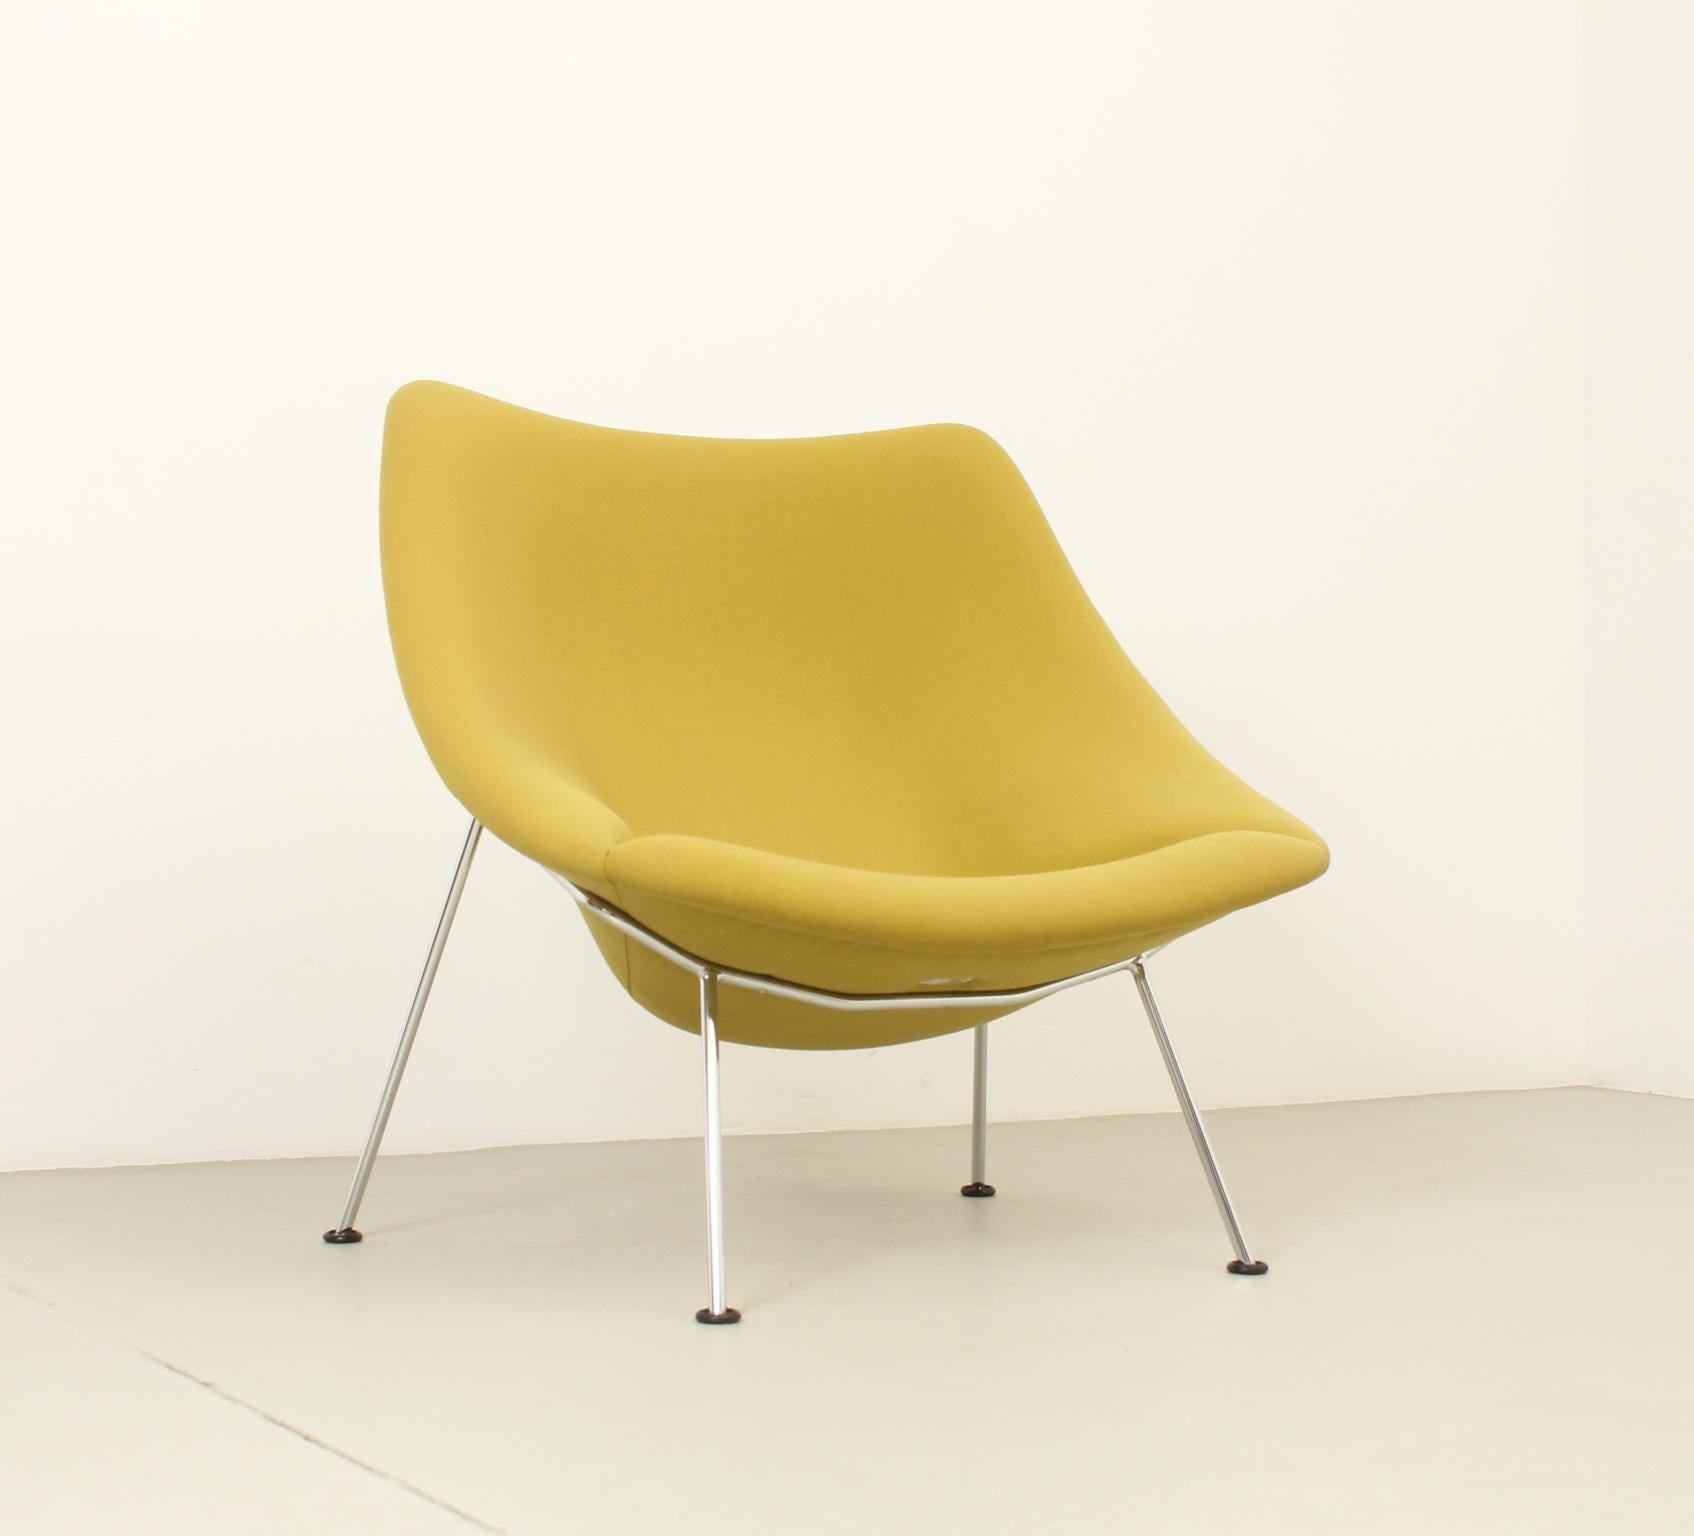 Oyster chair designed in 1958 by french designed Pierre Paulin for the dutch company Artifort. Chromed steel base and upholstered in original fabric. Signed. 